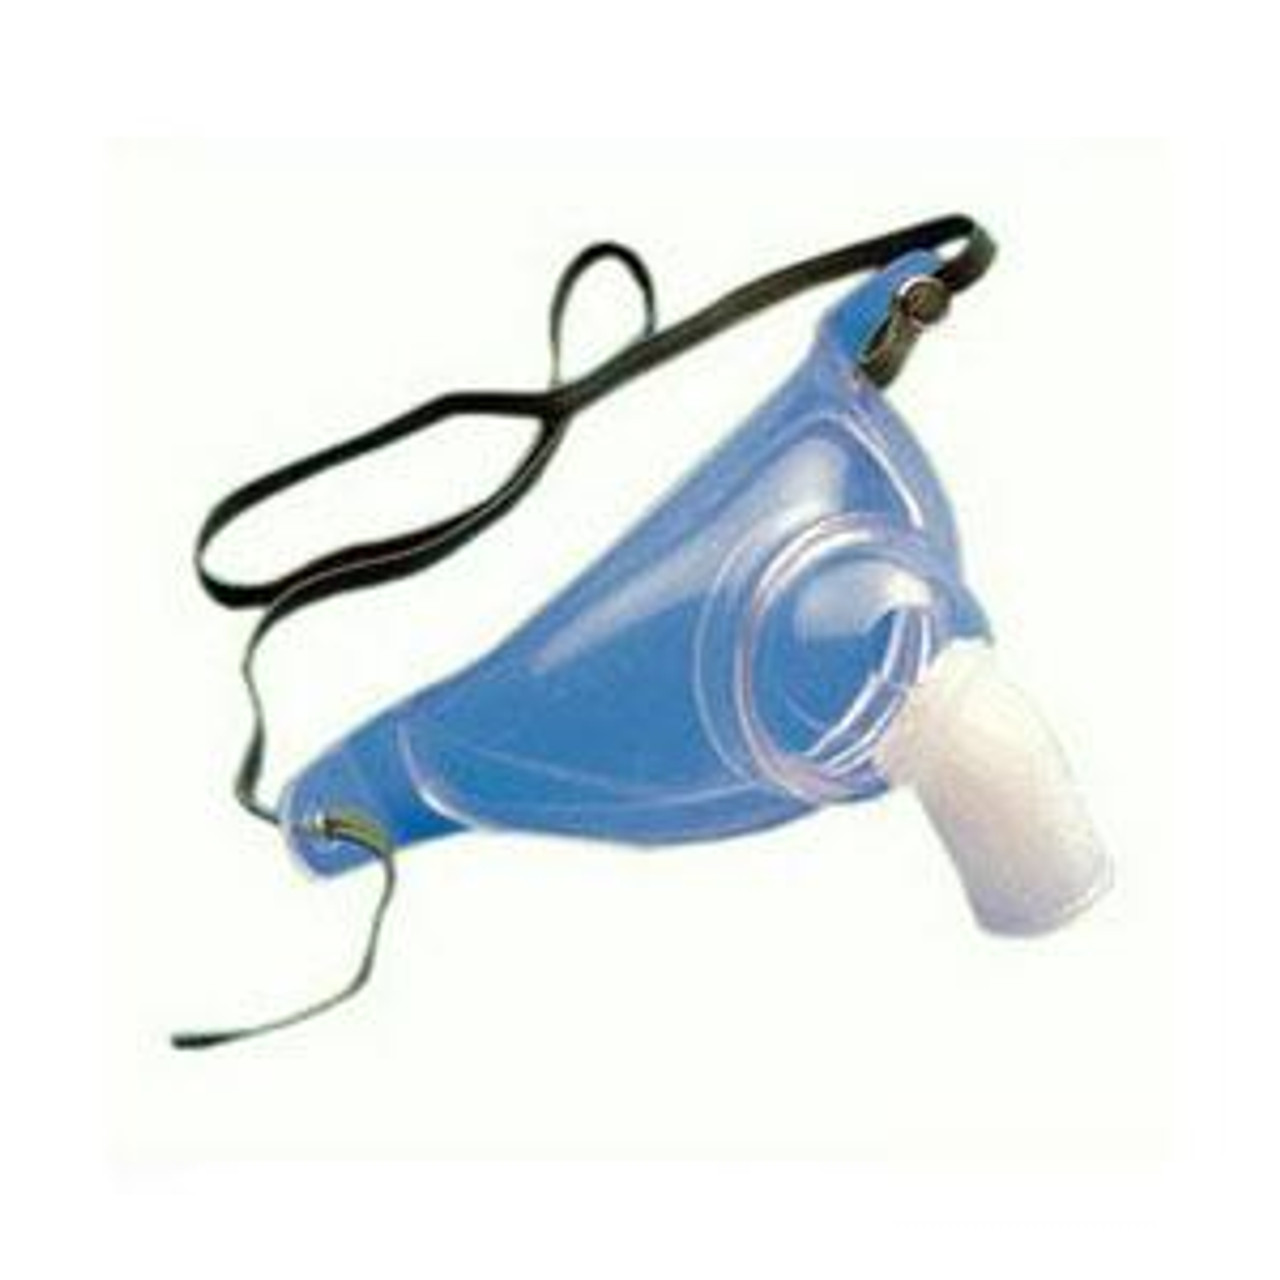 Baxter 001225 MASK OXYGEN TRACHEOSTOMY ADULT DISPOSABLE SWIVEL CONNECTOR w/STRAP CLIP (CS/50)